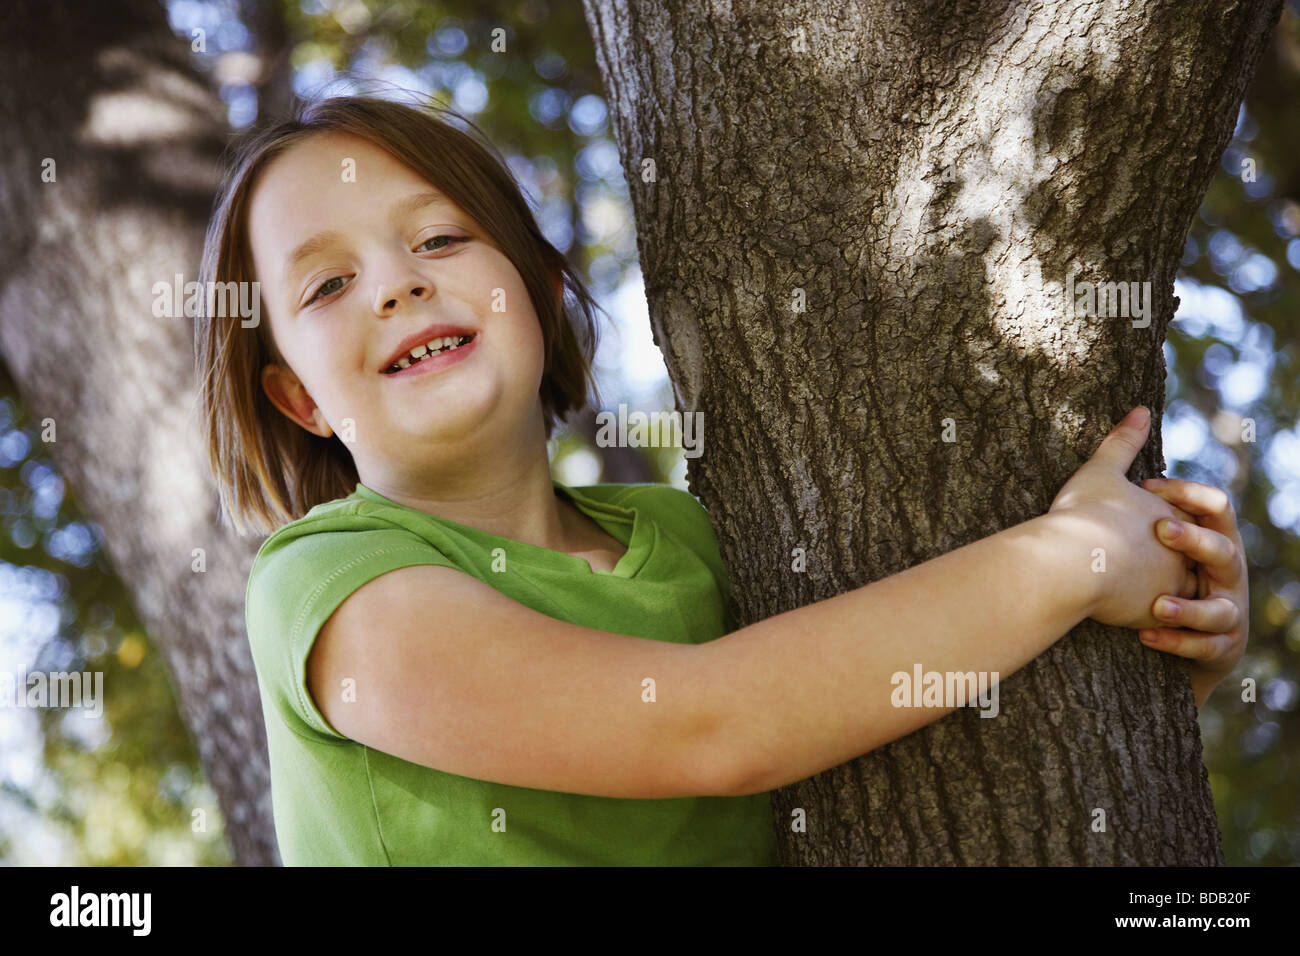 Portrait of a girl hugging a tree trunk and smiling Stock Photo